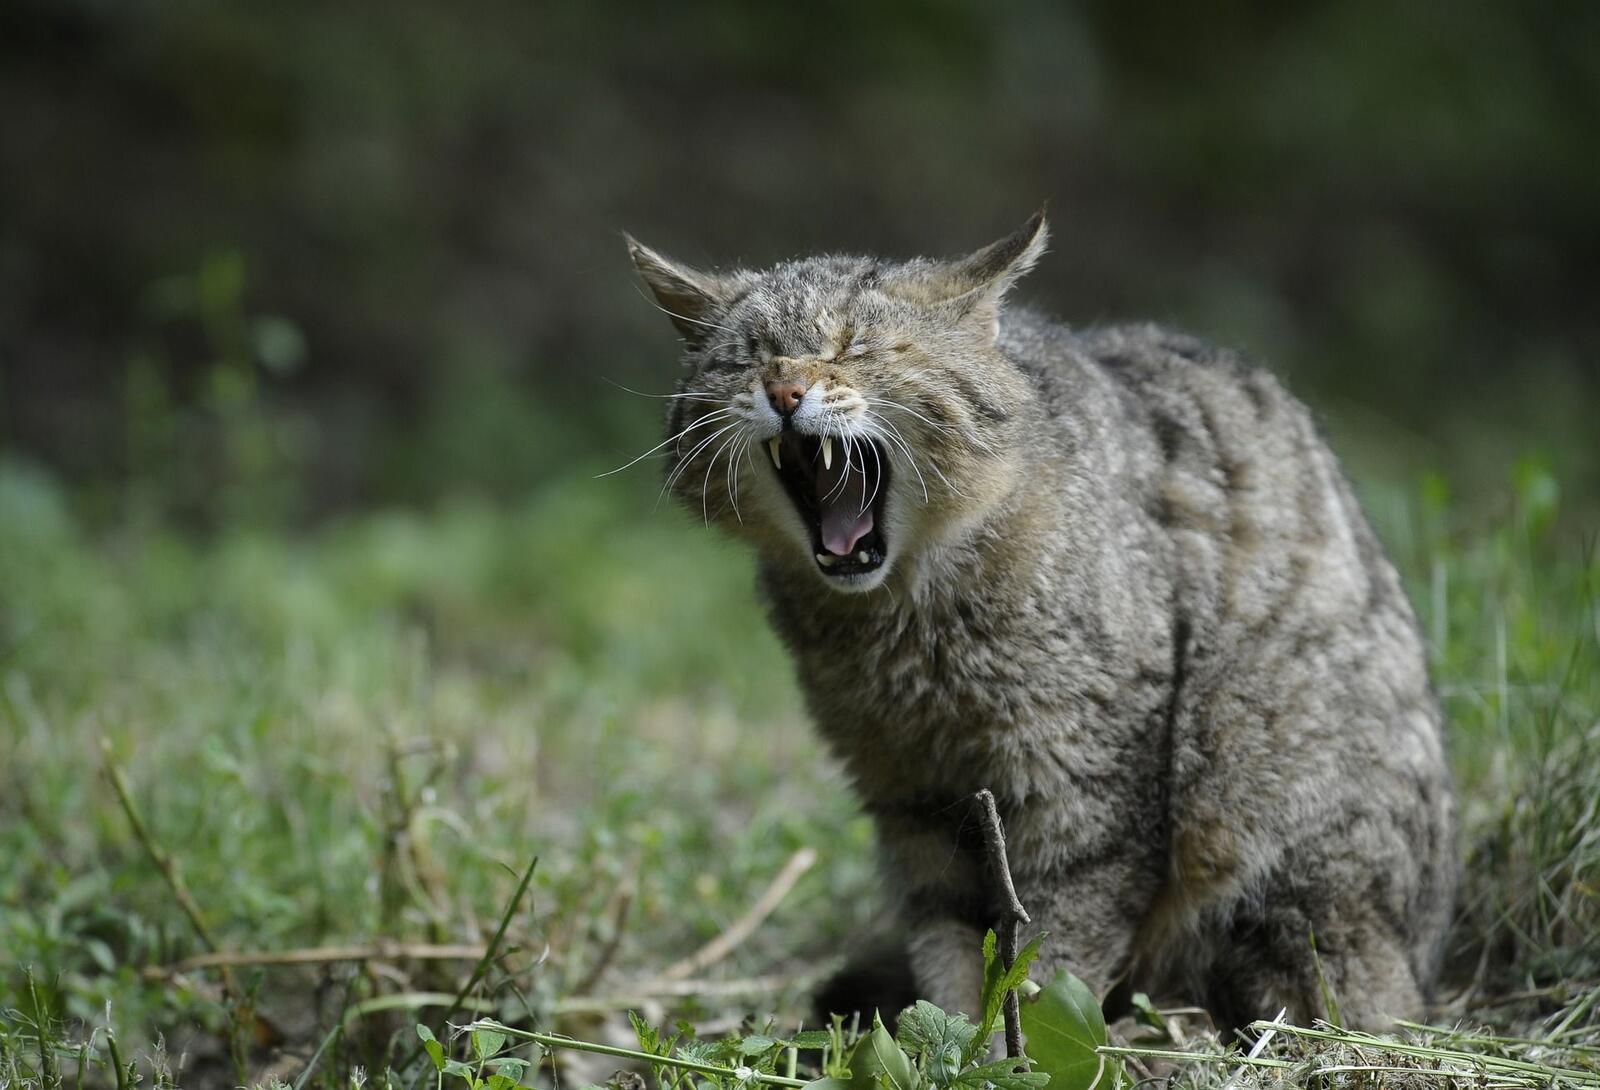 Wallpapers cats yawning wallpaper wild cat on the desktop